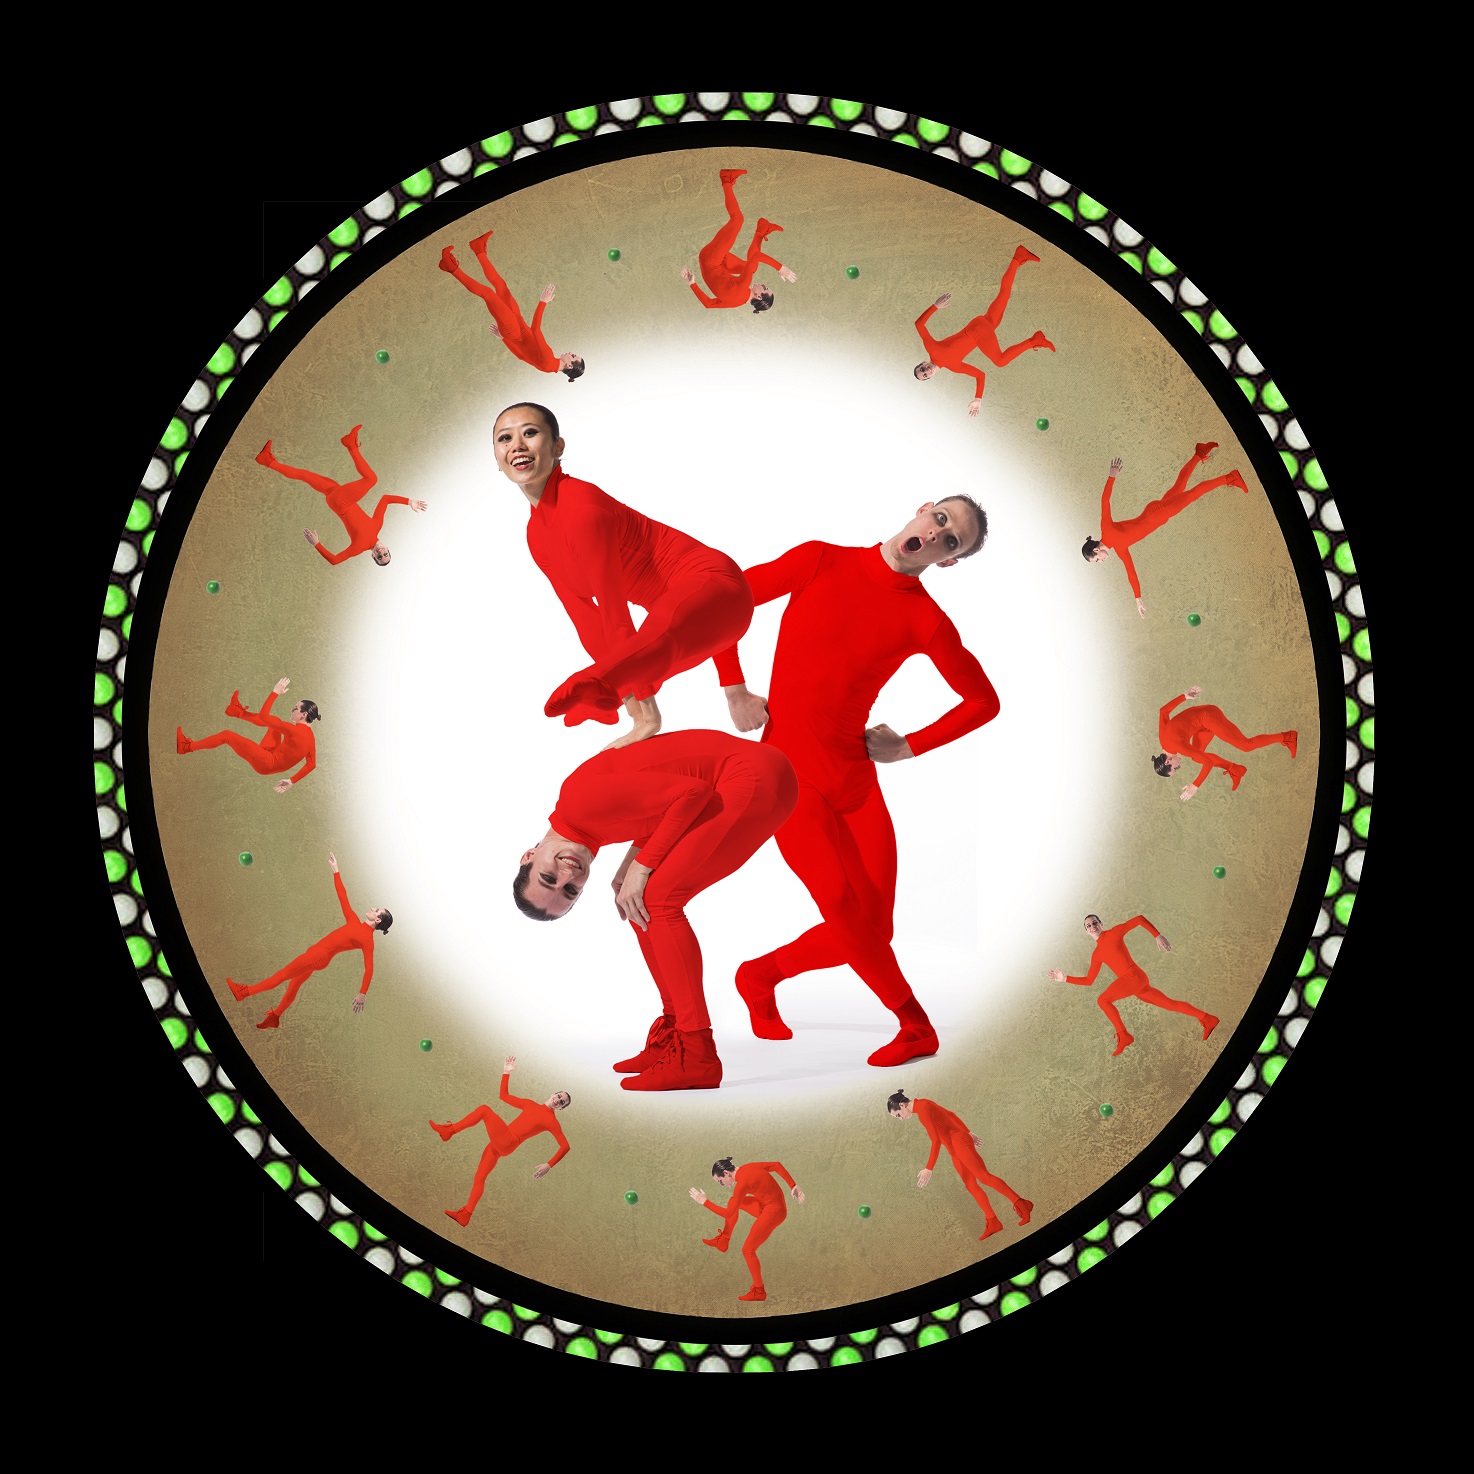 Zoetrope wheel with dancers in red costumes leap frogging over one another 